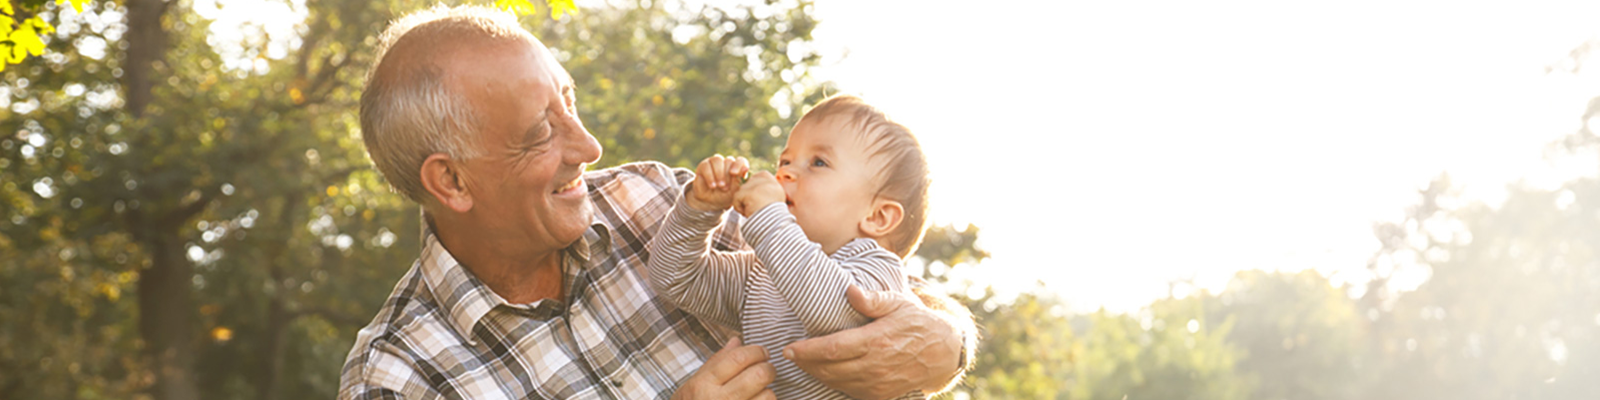 elderly man happily holding a baby outdoors